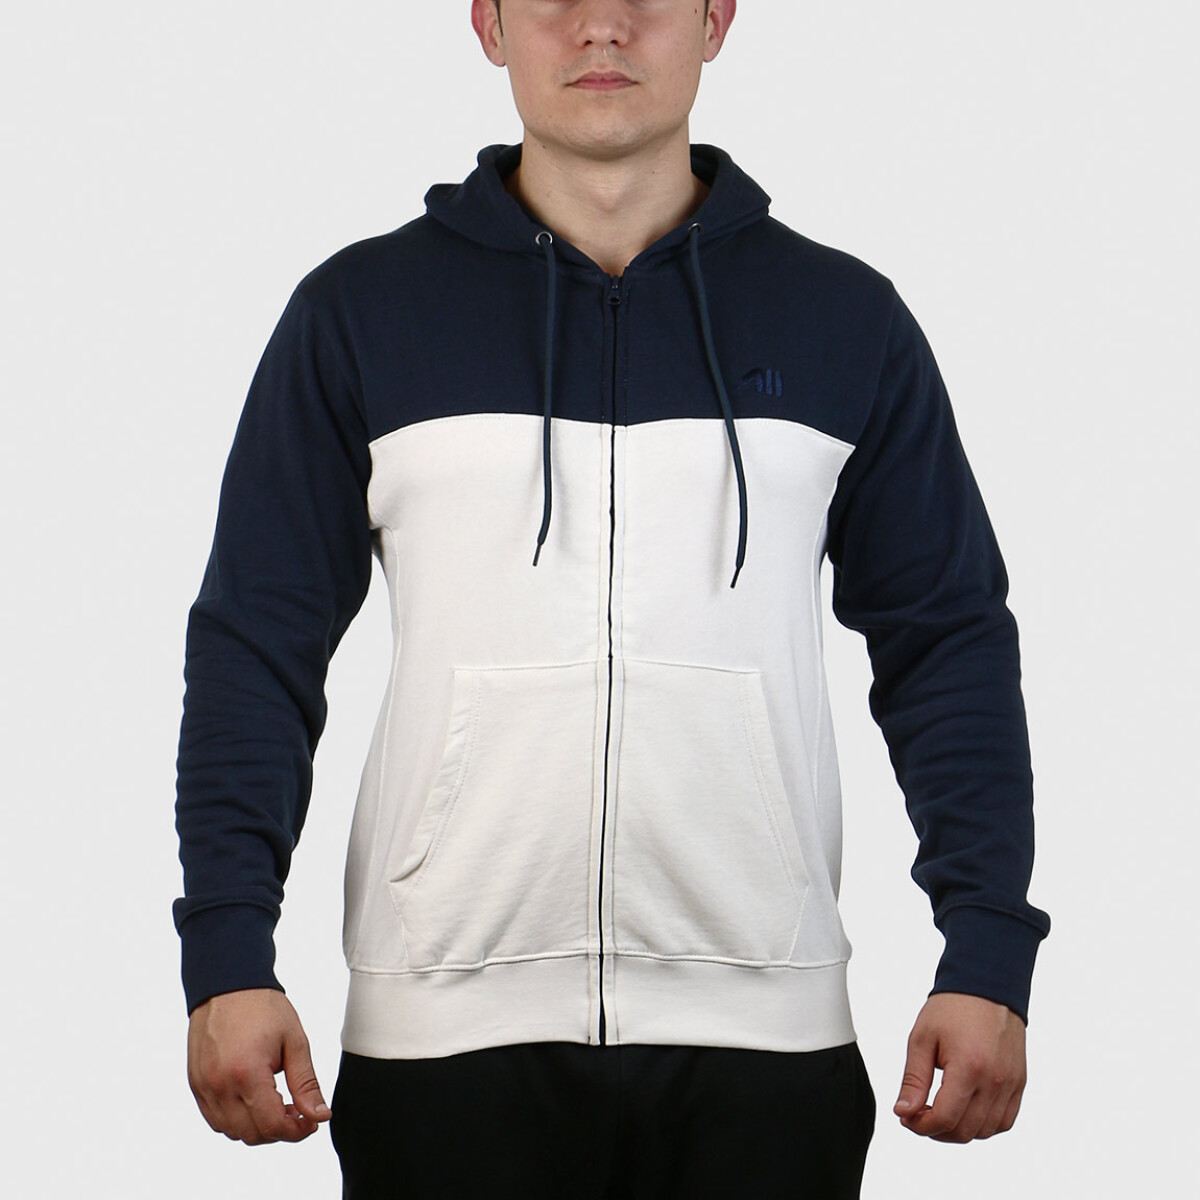 Austral Men Cotton Hoodie With Contrast- Navy/white - Marino-blanco 